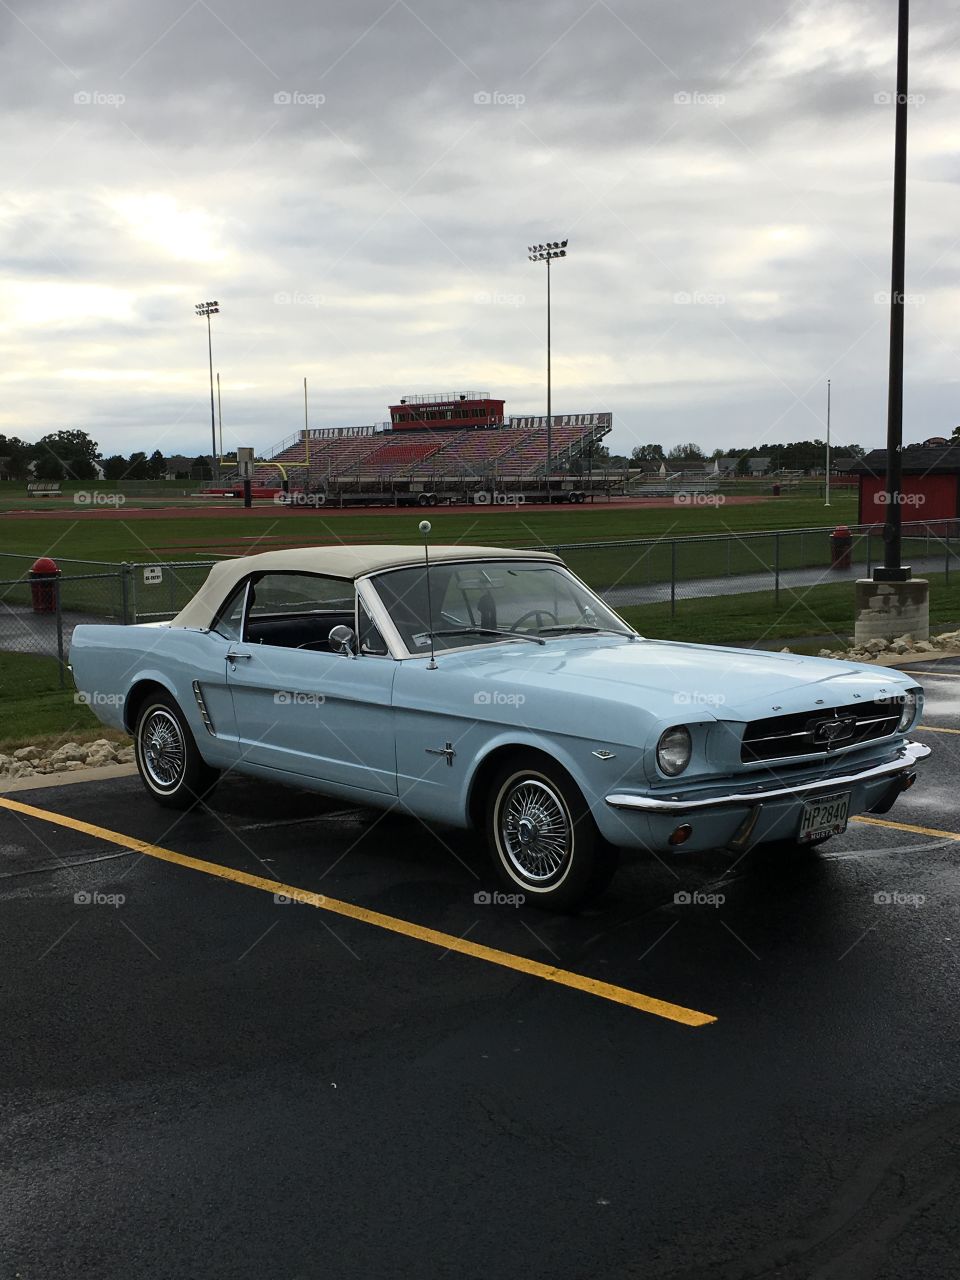 The stang